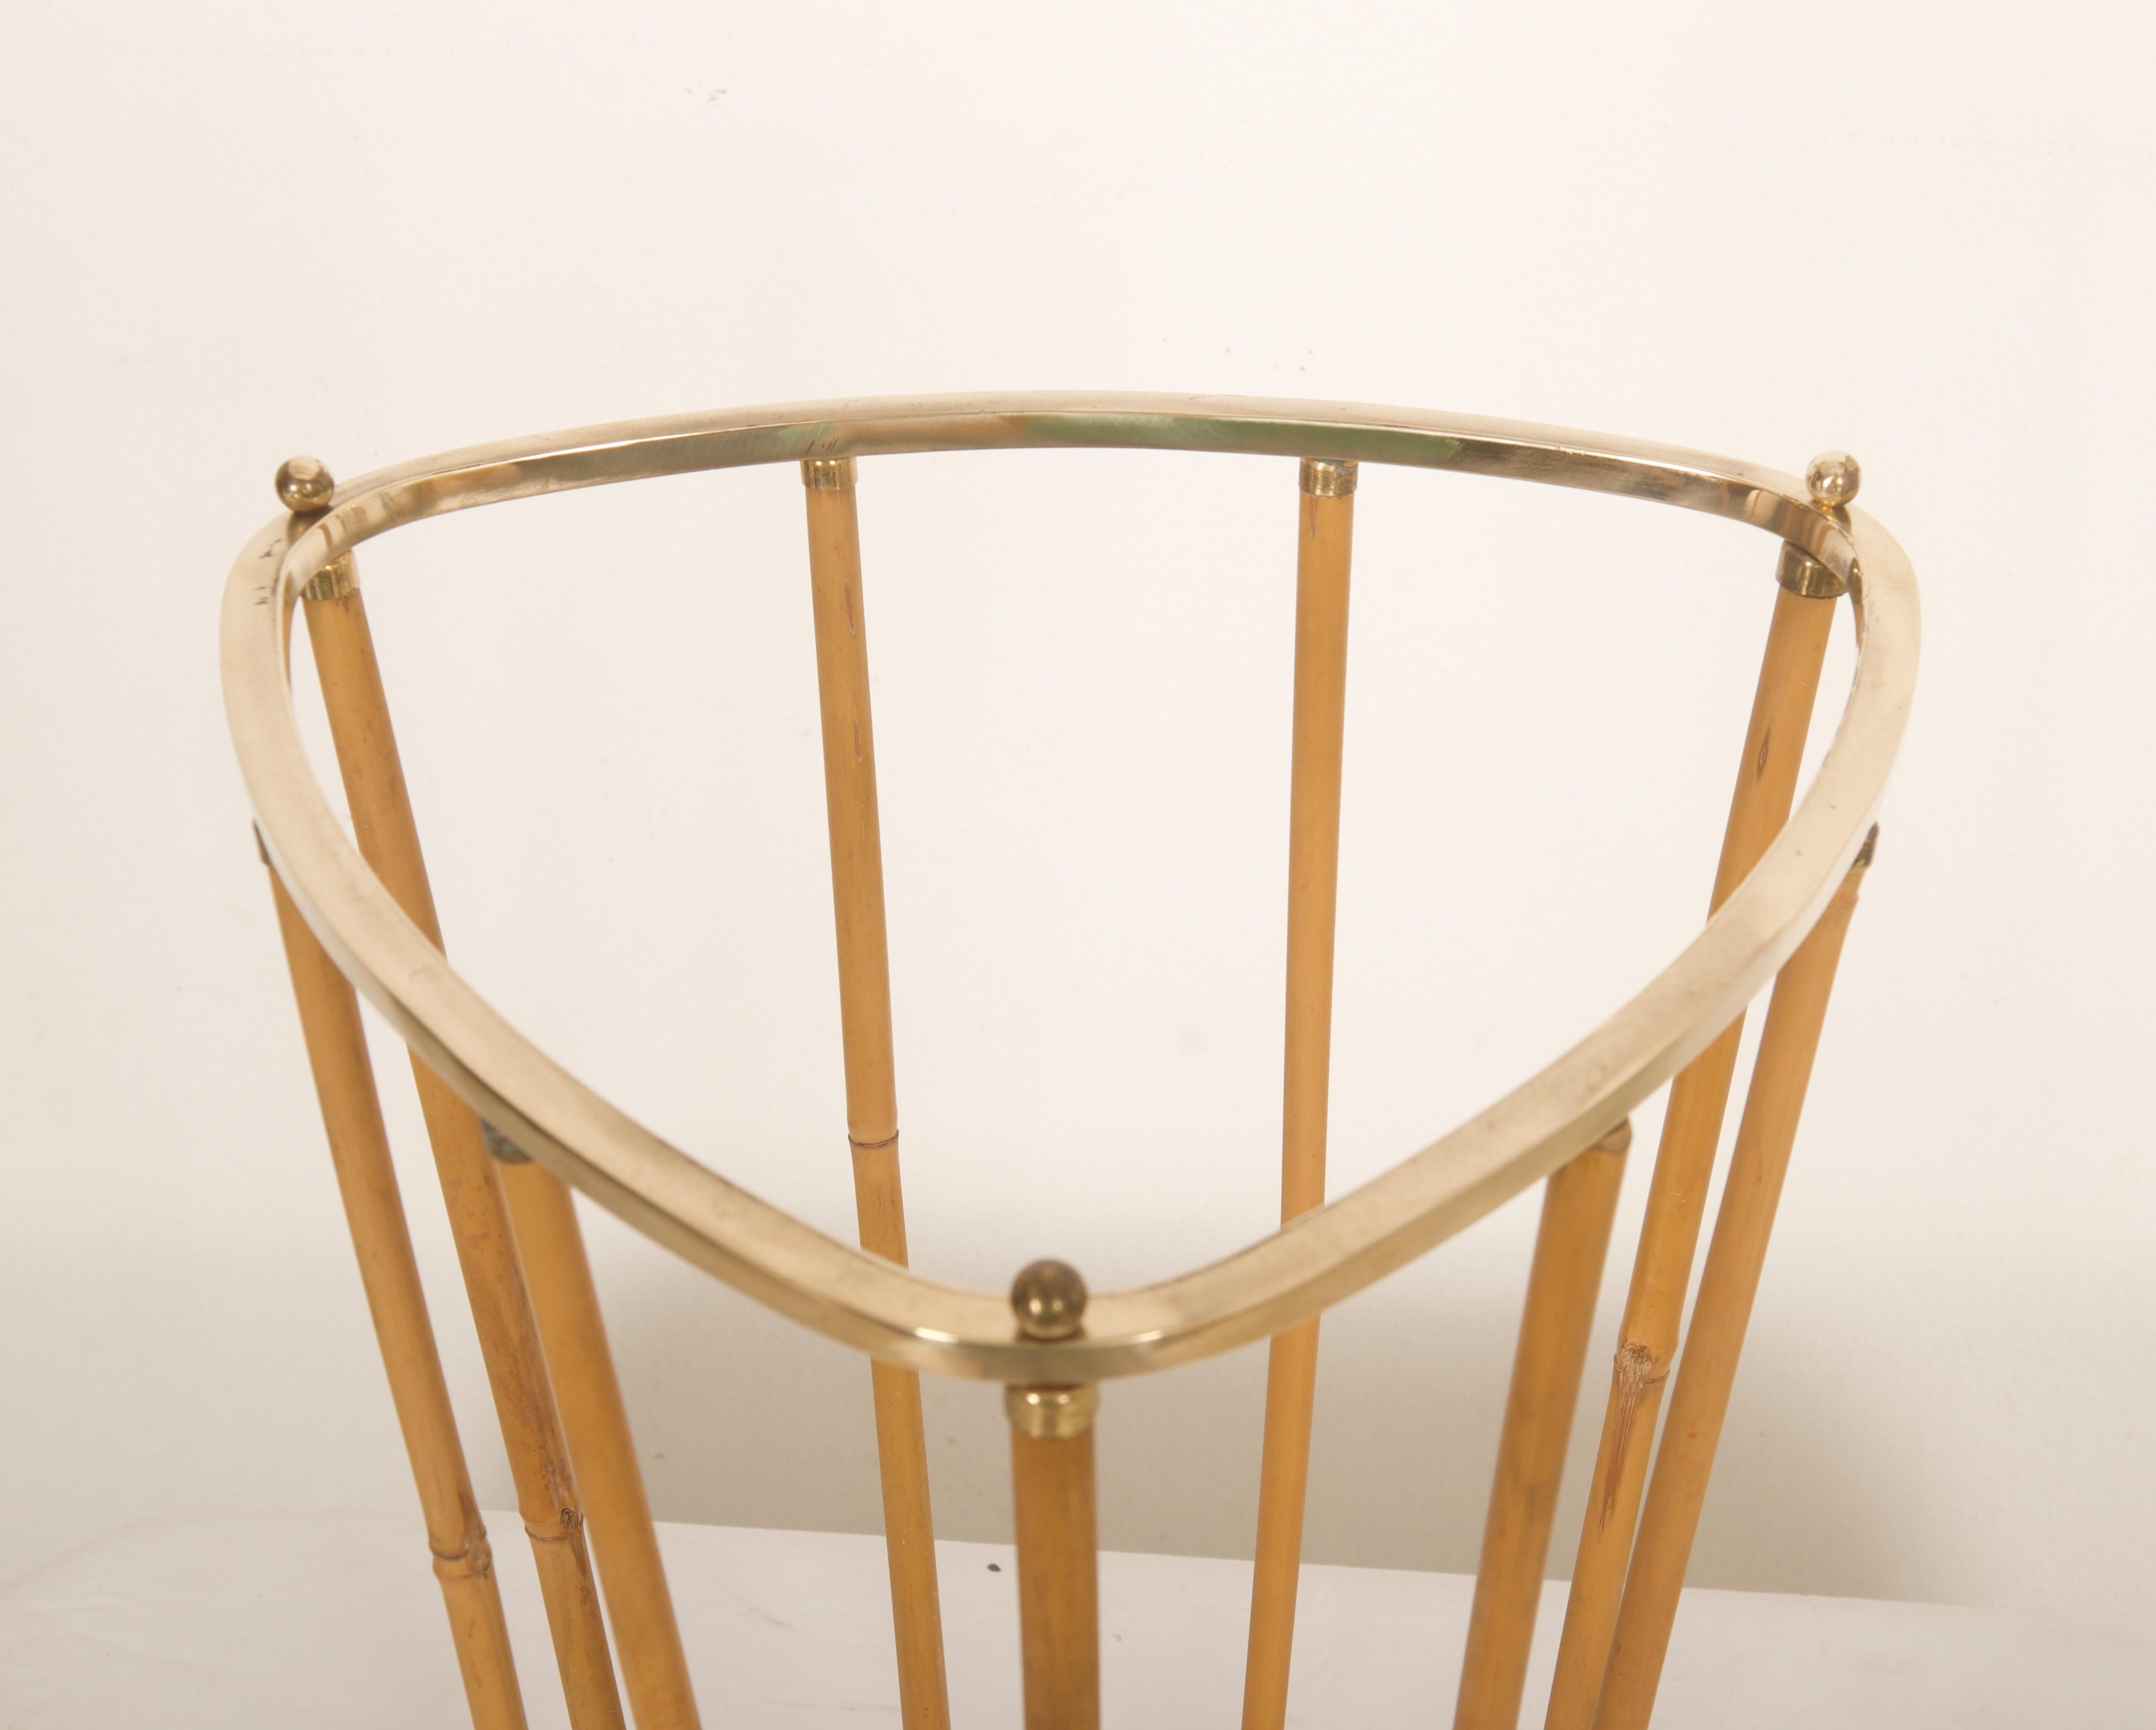 Austrian Midcentury Brass Bamboo Umbrella Stand  In Good Condition For Sale In Vienna, AT